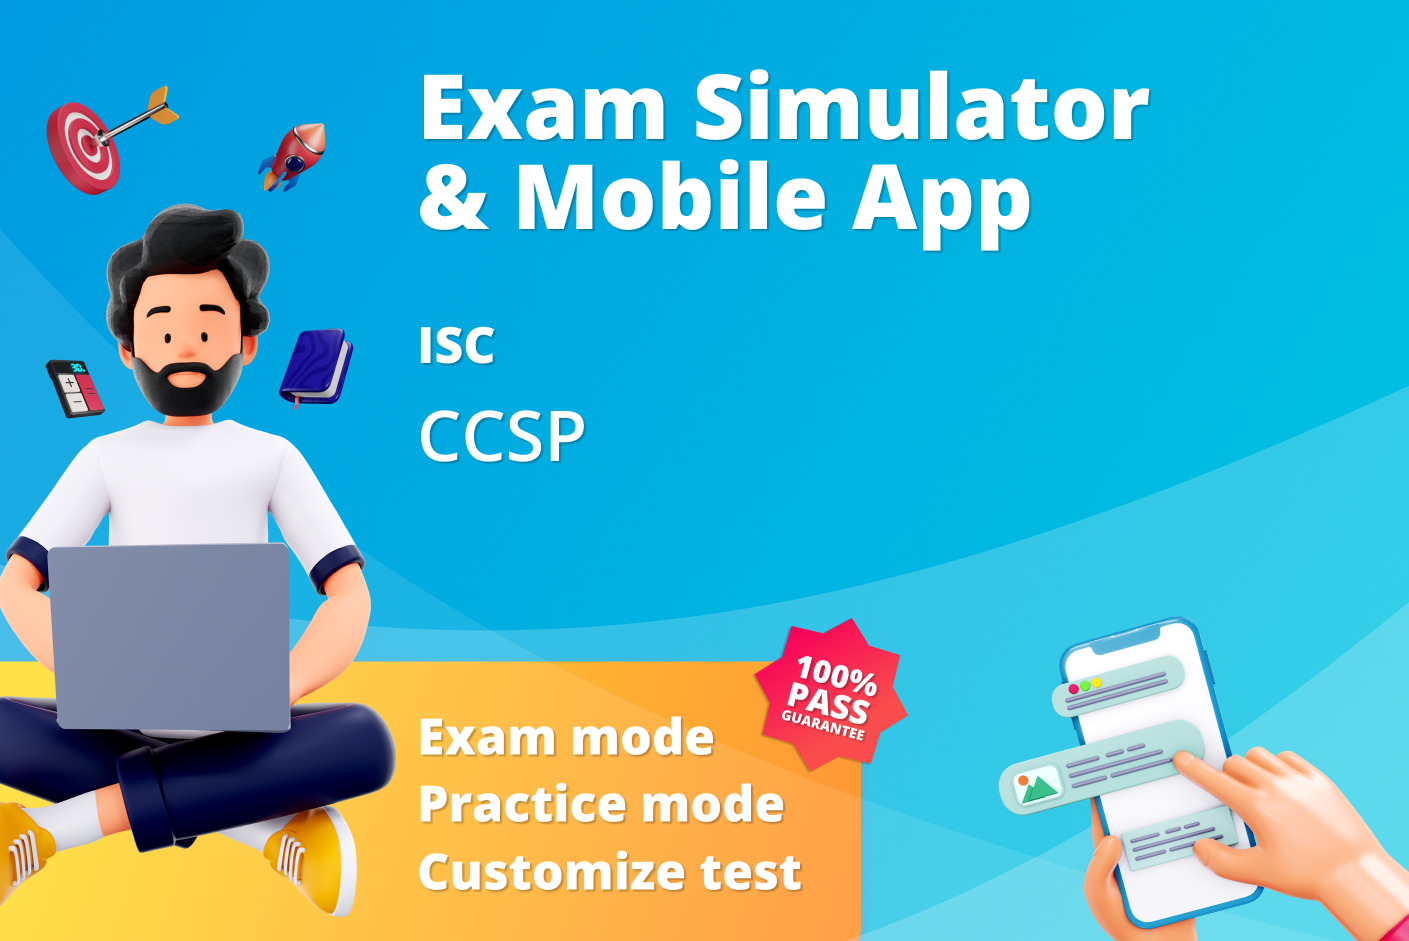 Cissp mock exam - Test your knowledge and prepare for certification with our comprehensive practice tests